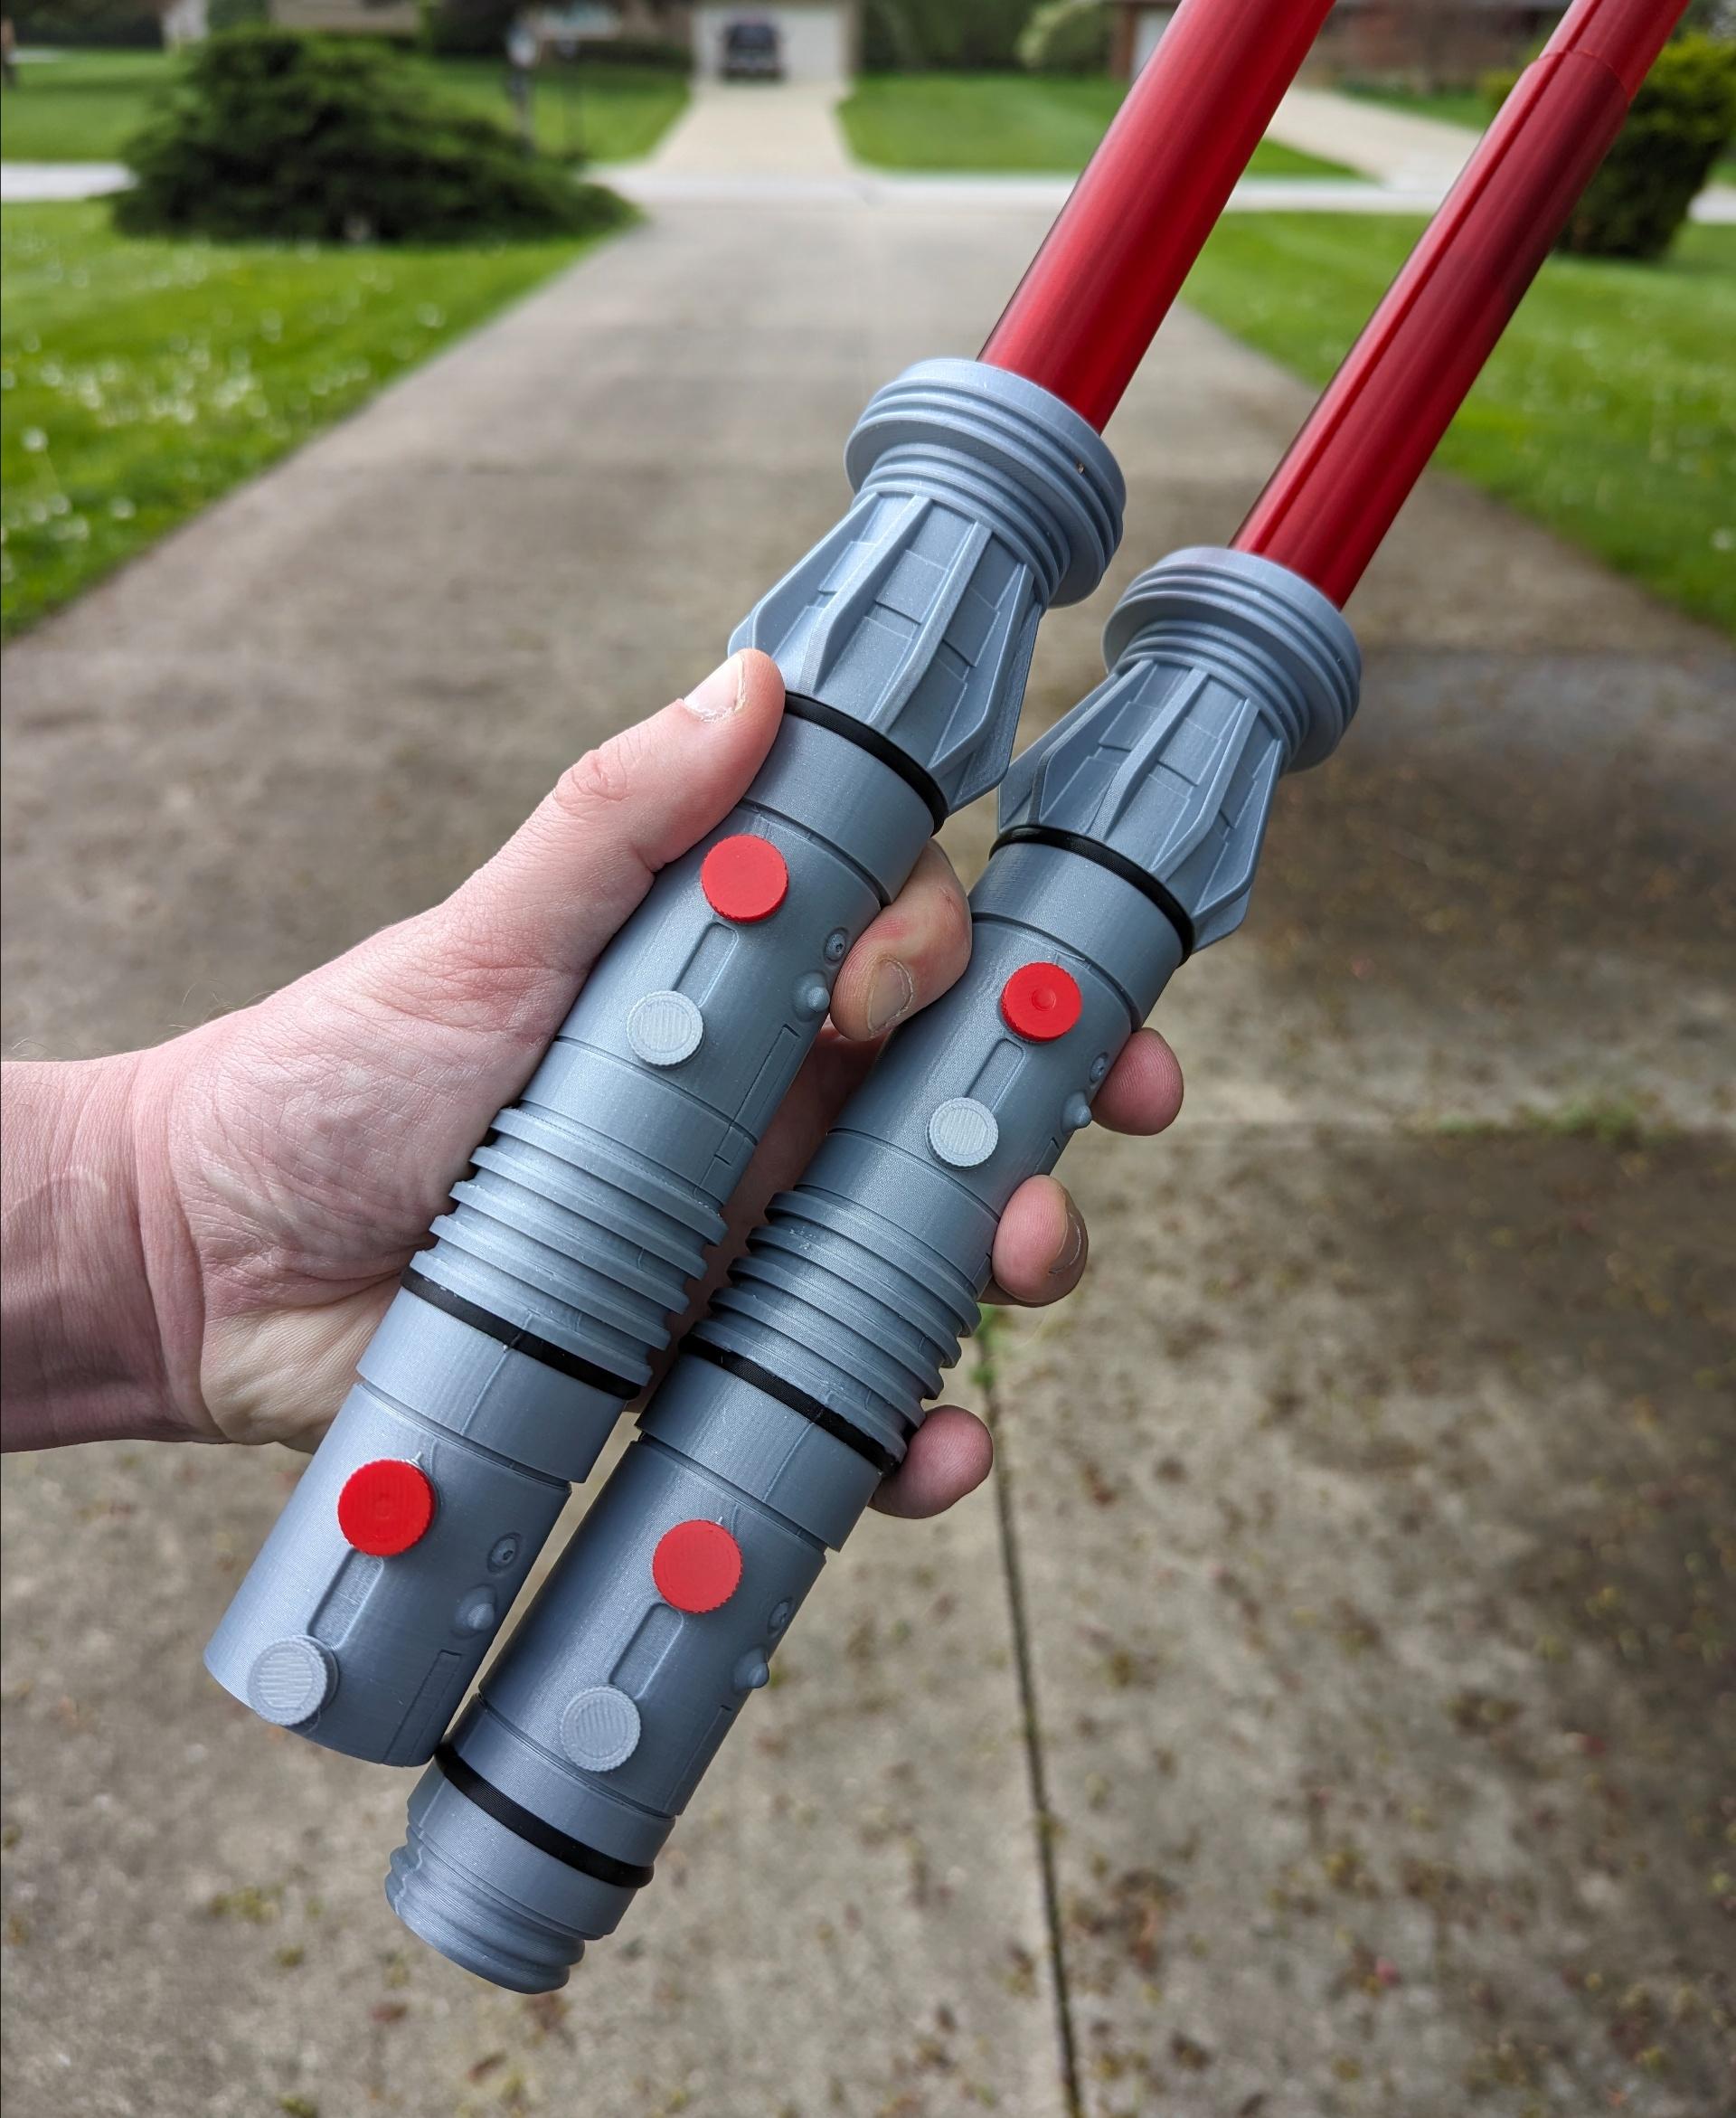 Maul’s Replaceable Blade Lightsaber - Printed on the Prusa3D MK3.5 with filaments:
- Polymaker Metallic Silver 
- PrintedSolid Black
- Prusament Lipstick Red
- Coex3D Translucent Blood Red - 3d model